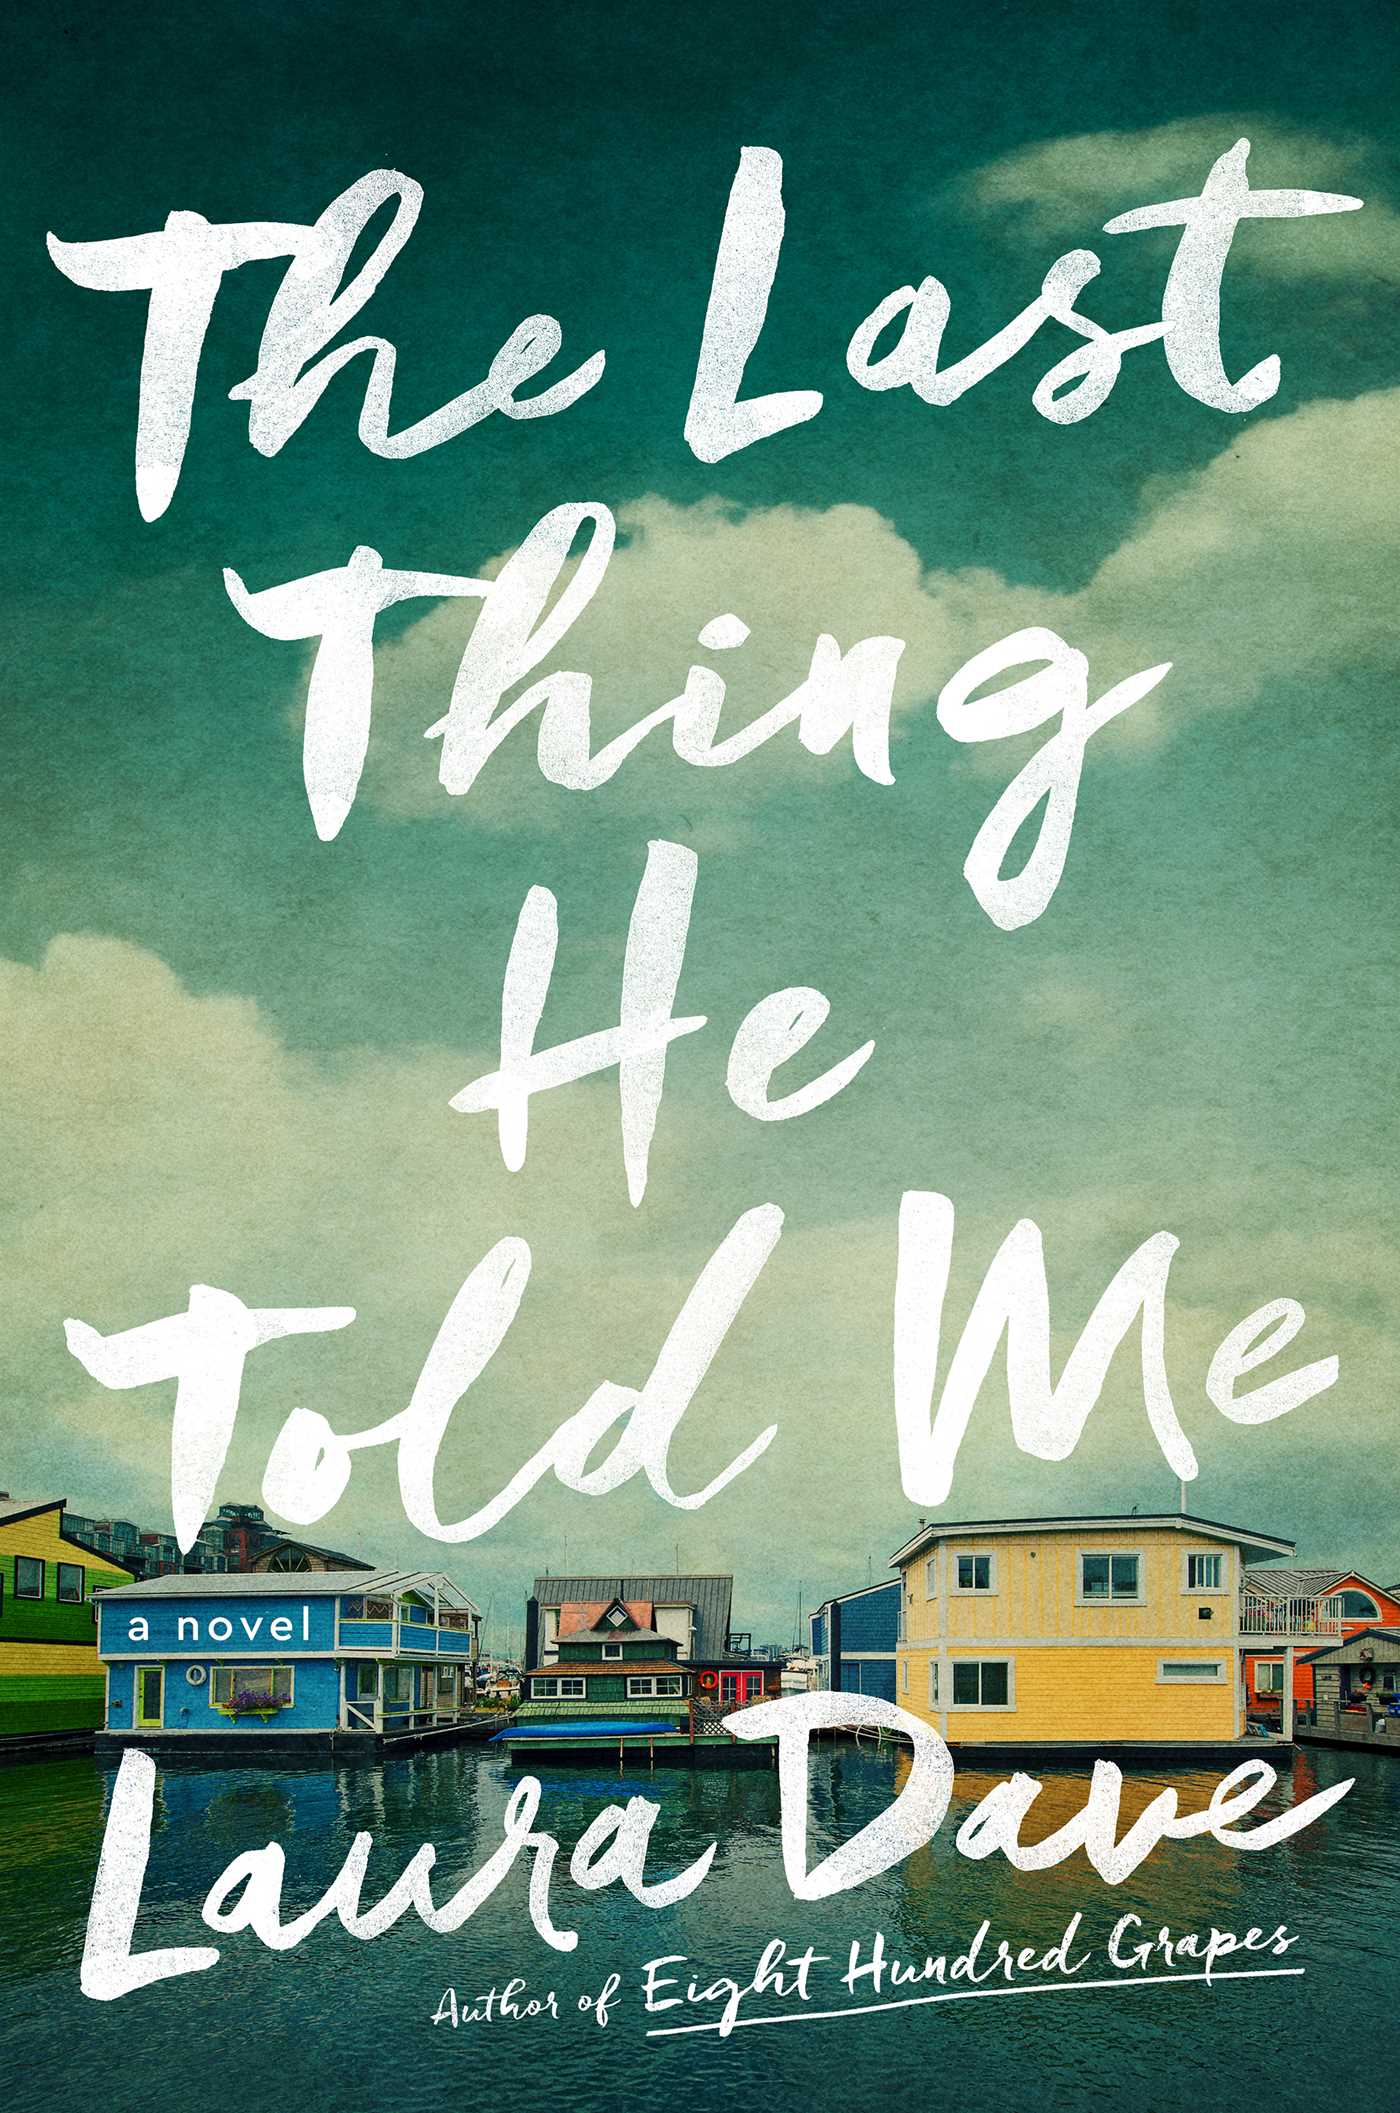 Book cover of "The Last Thing He Told Me" by Laura Dave; featuring a row of color houses by a body of water